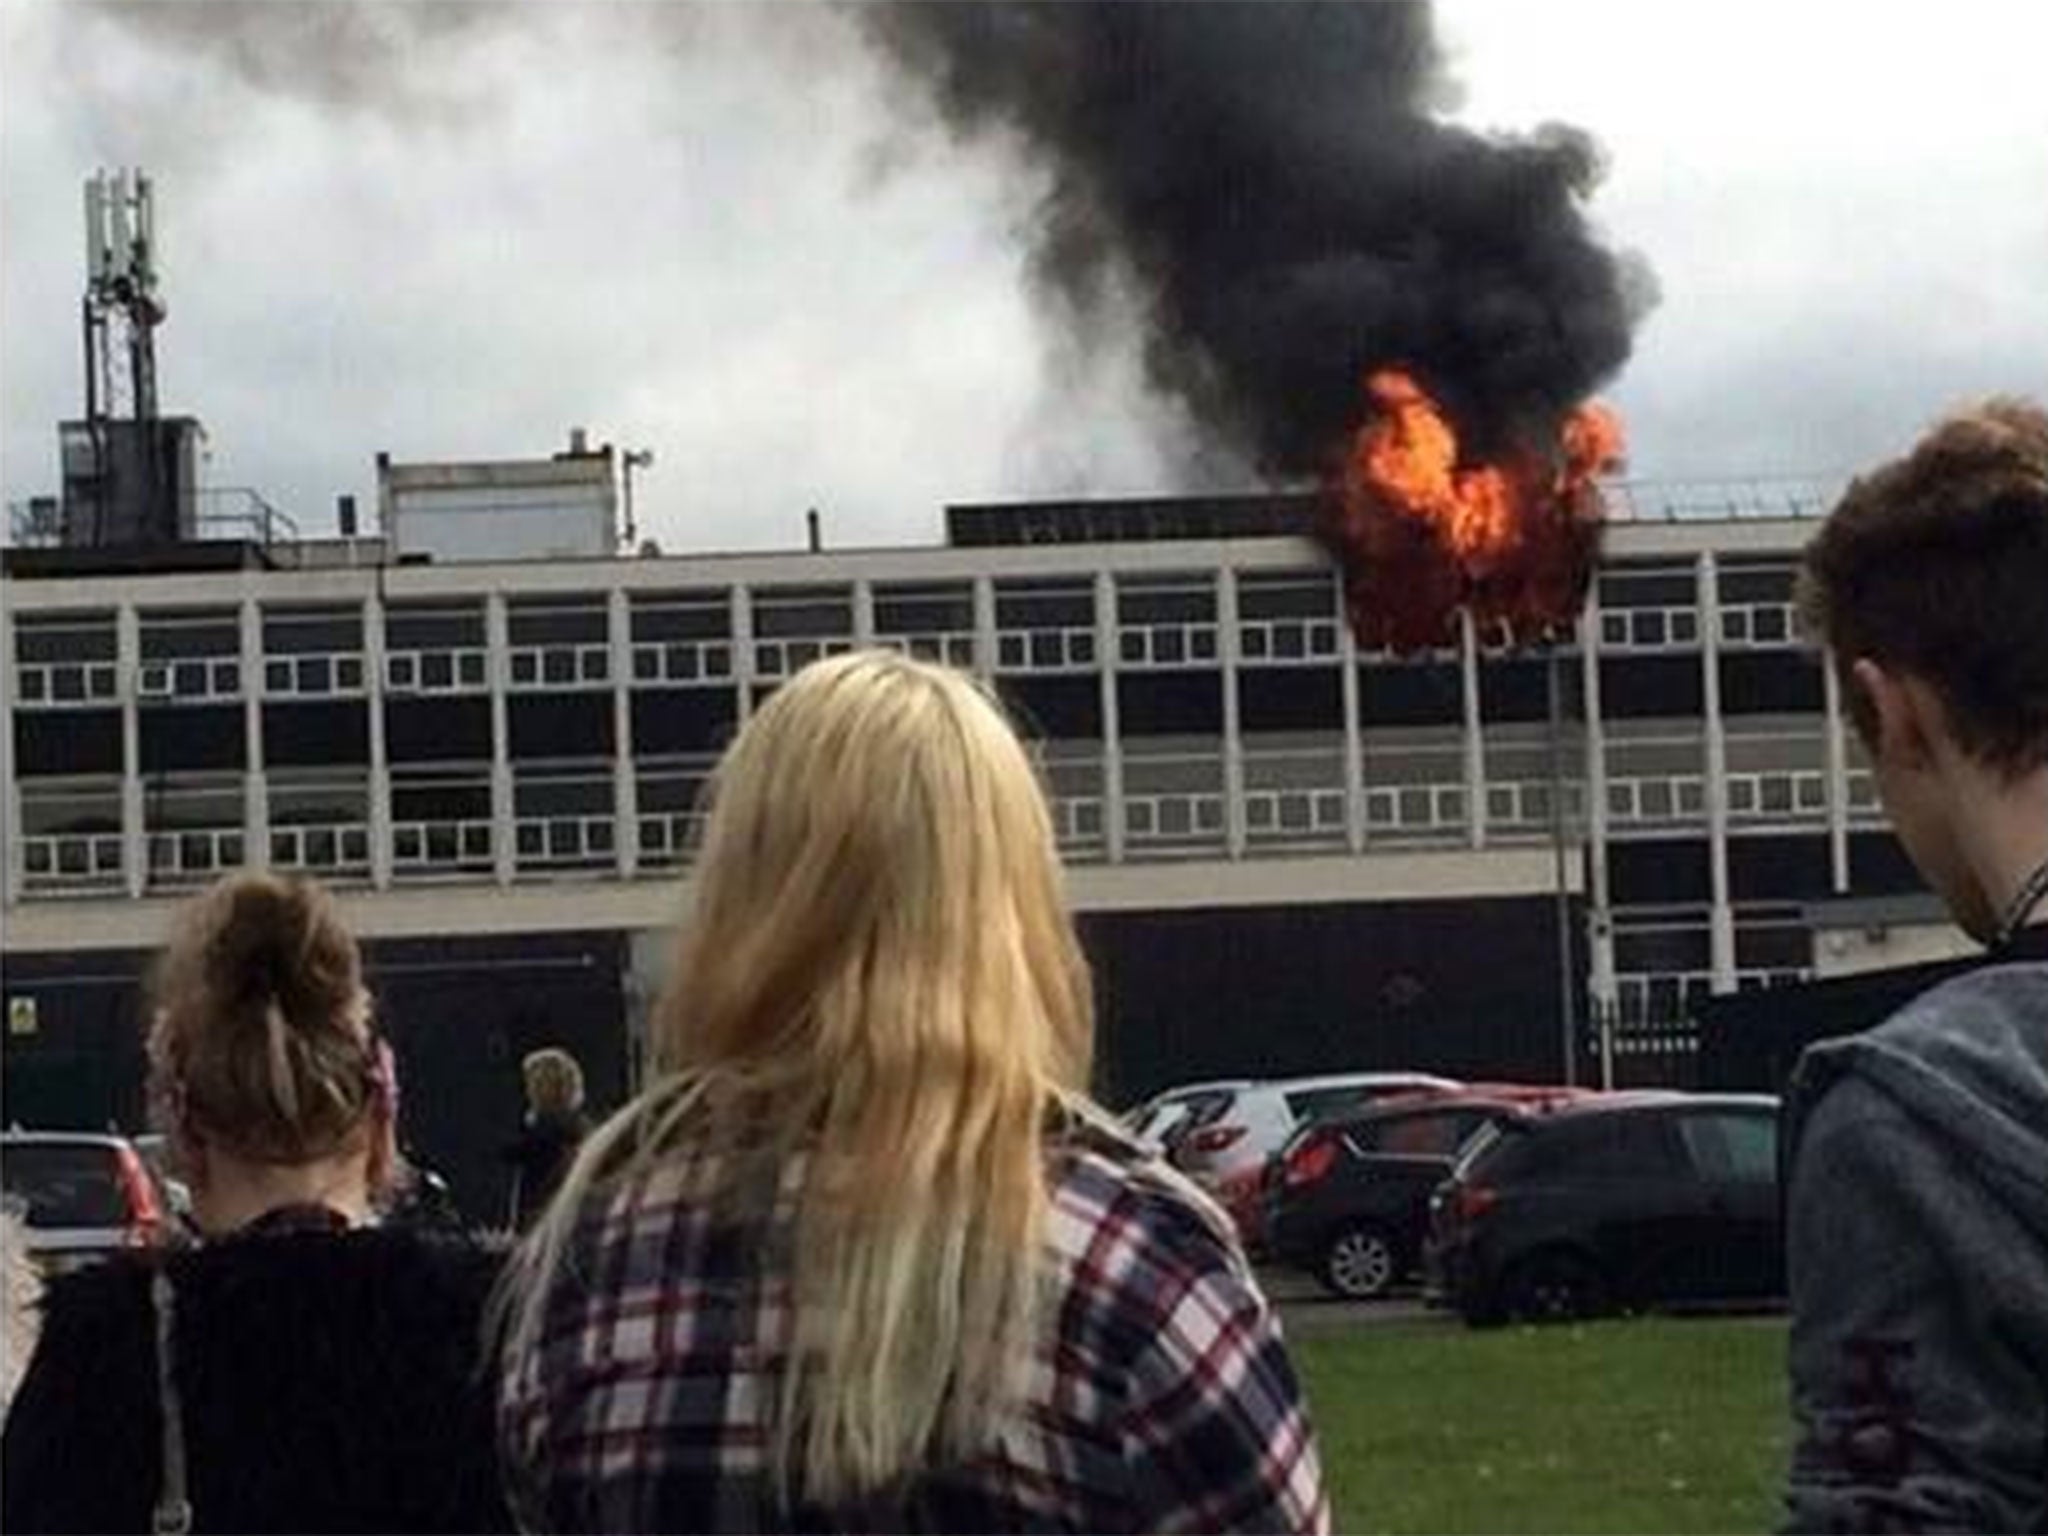 A major fire breaks out at Pendleton College in Salford